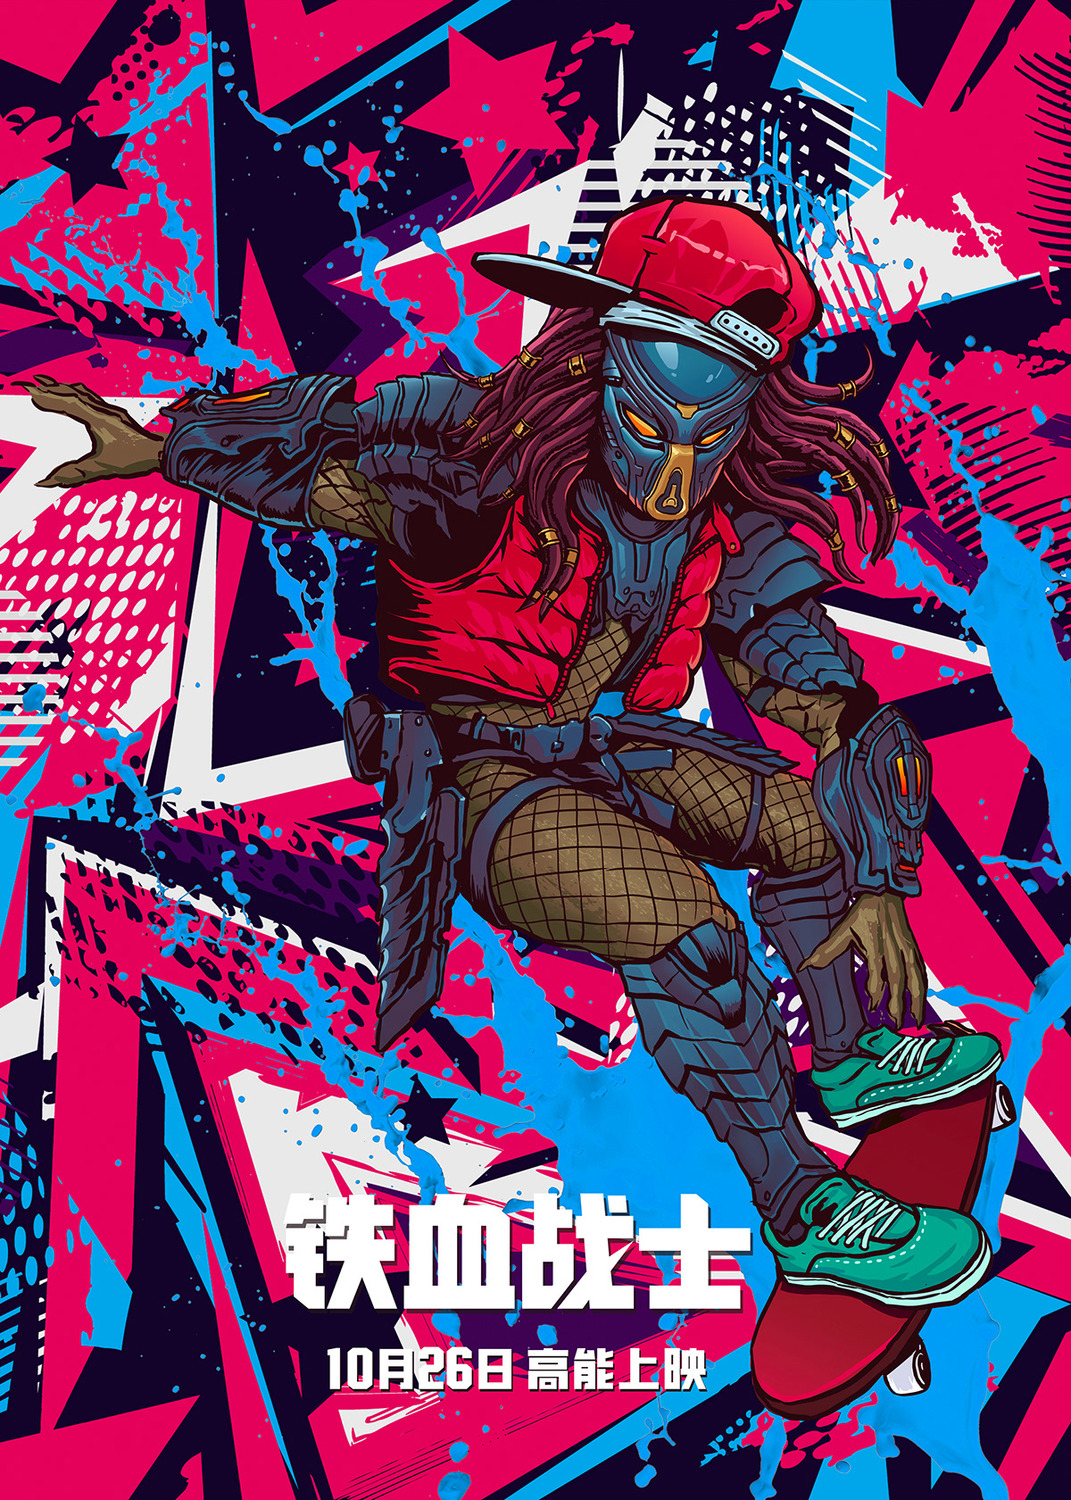 Extra Large Movie Poster Image for The Predator (#8 of 9)